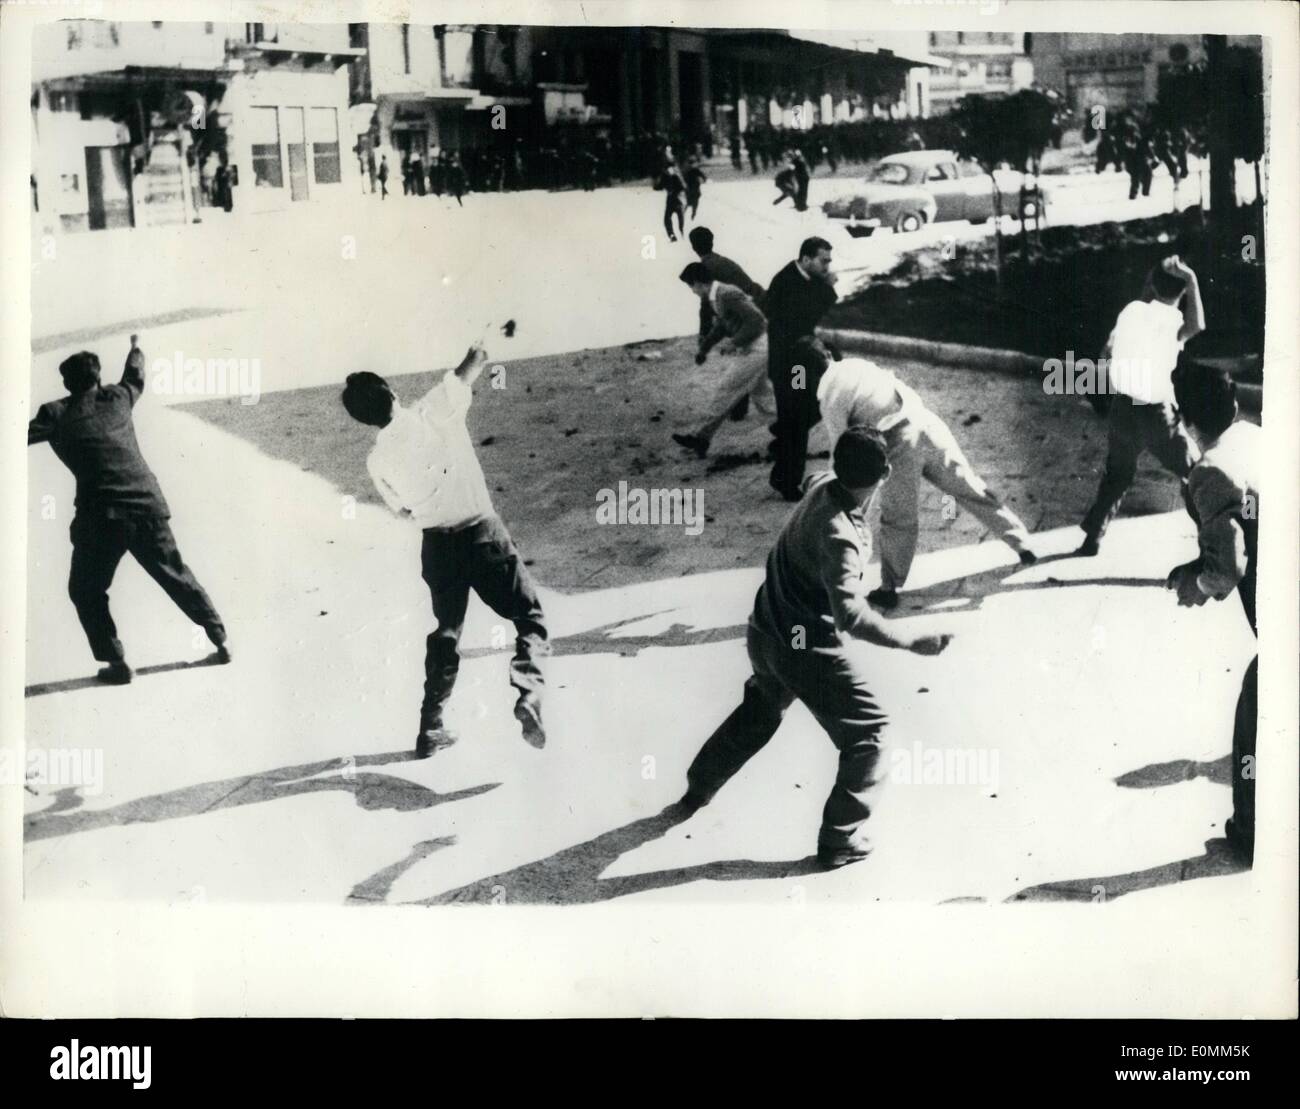 Oct. 10, 1955 - Demonstrators in Athens in Greek resistance day. Rioters throw stones at the police.; Photo shows demonstrators Stock Photo